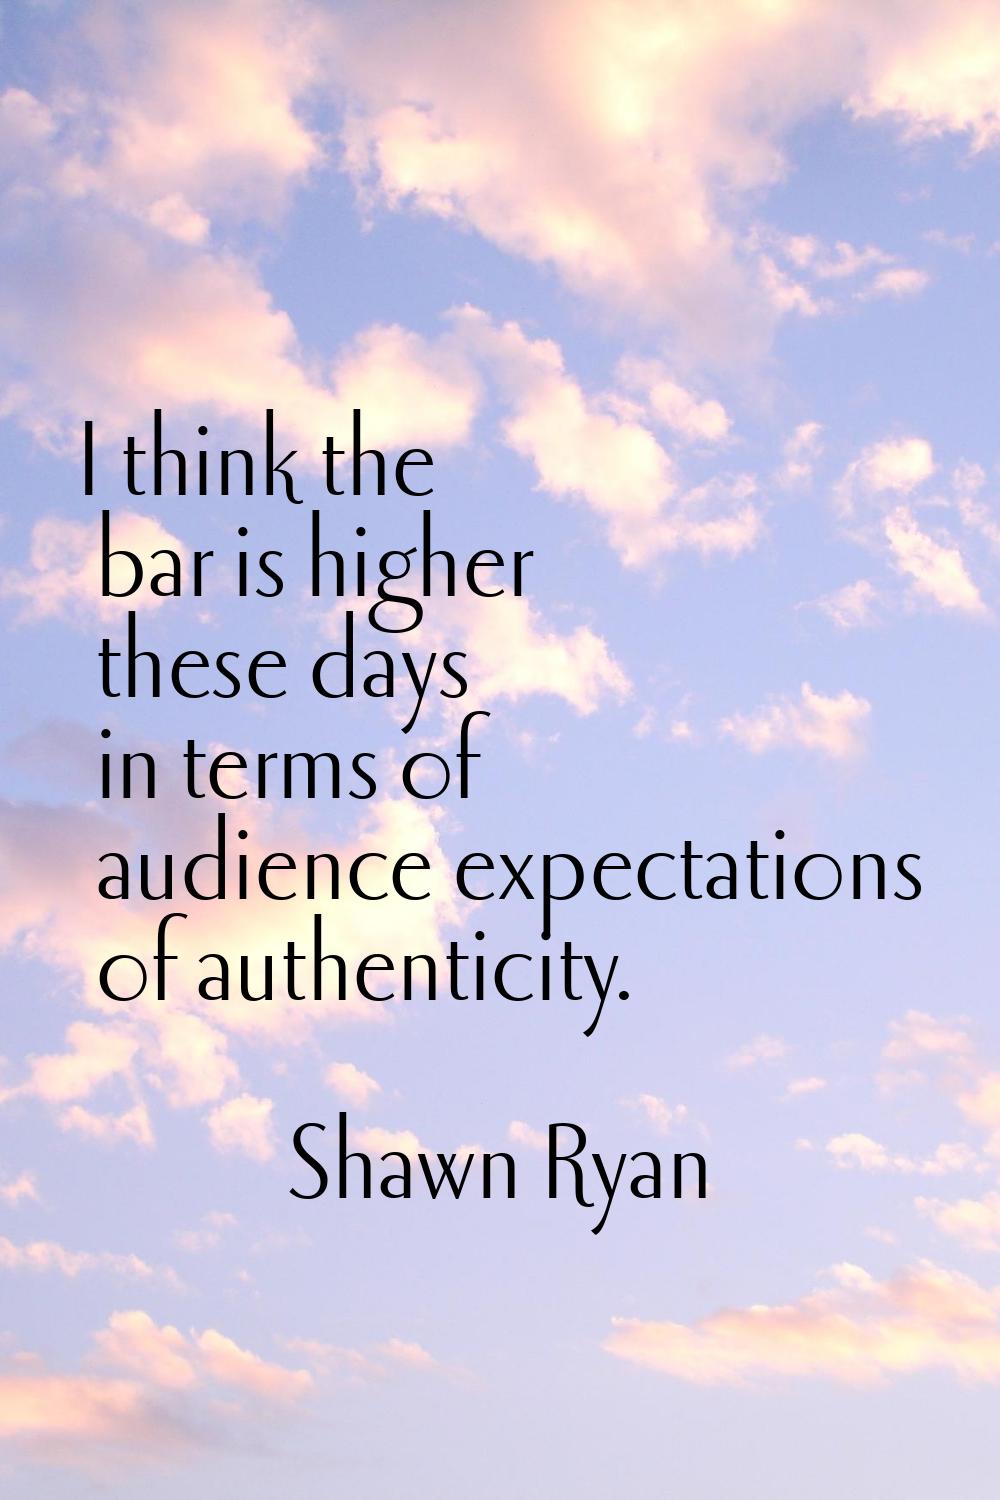 I think the bar is higher these days in terms of audience expectations of authenticity.